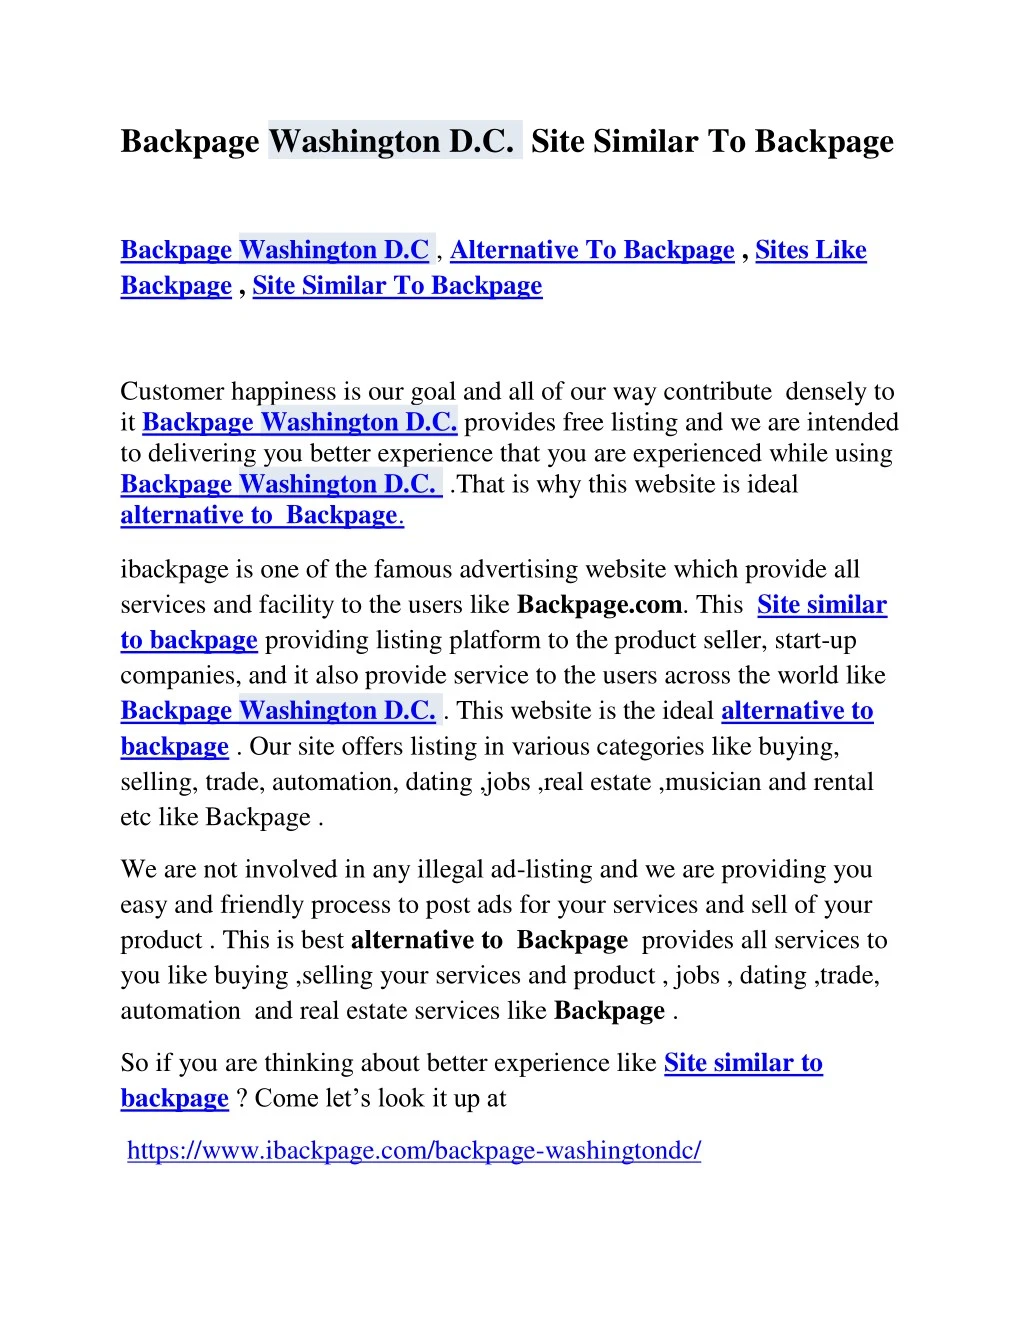 backpage washington d c site similar to backpage